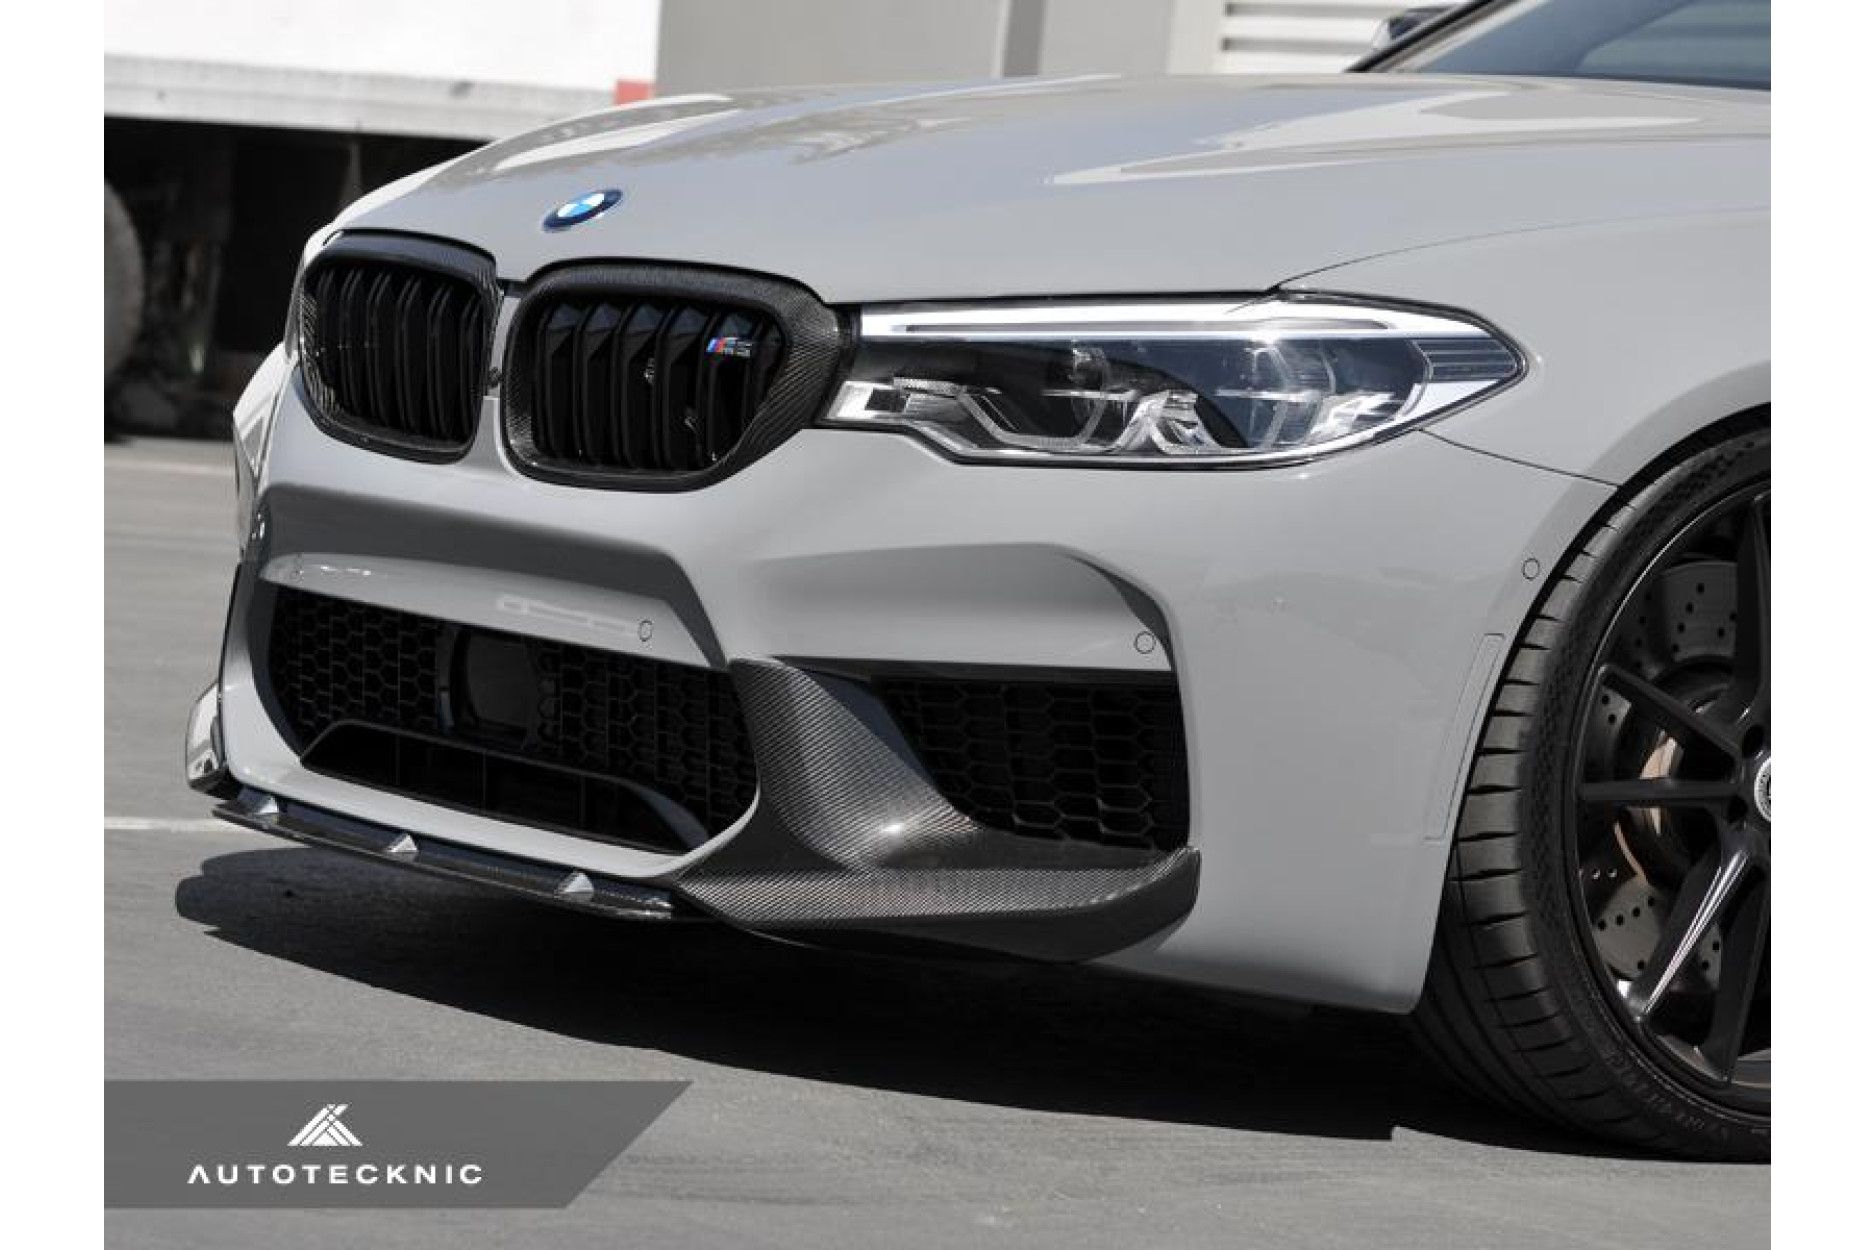 Autotecknic Carbon frontlip for BMW F90 M5 - buy online at CFD